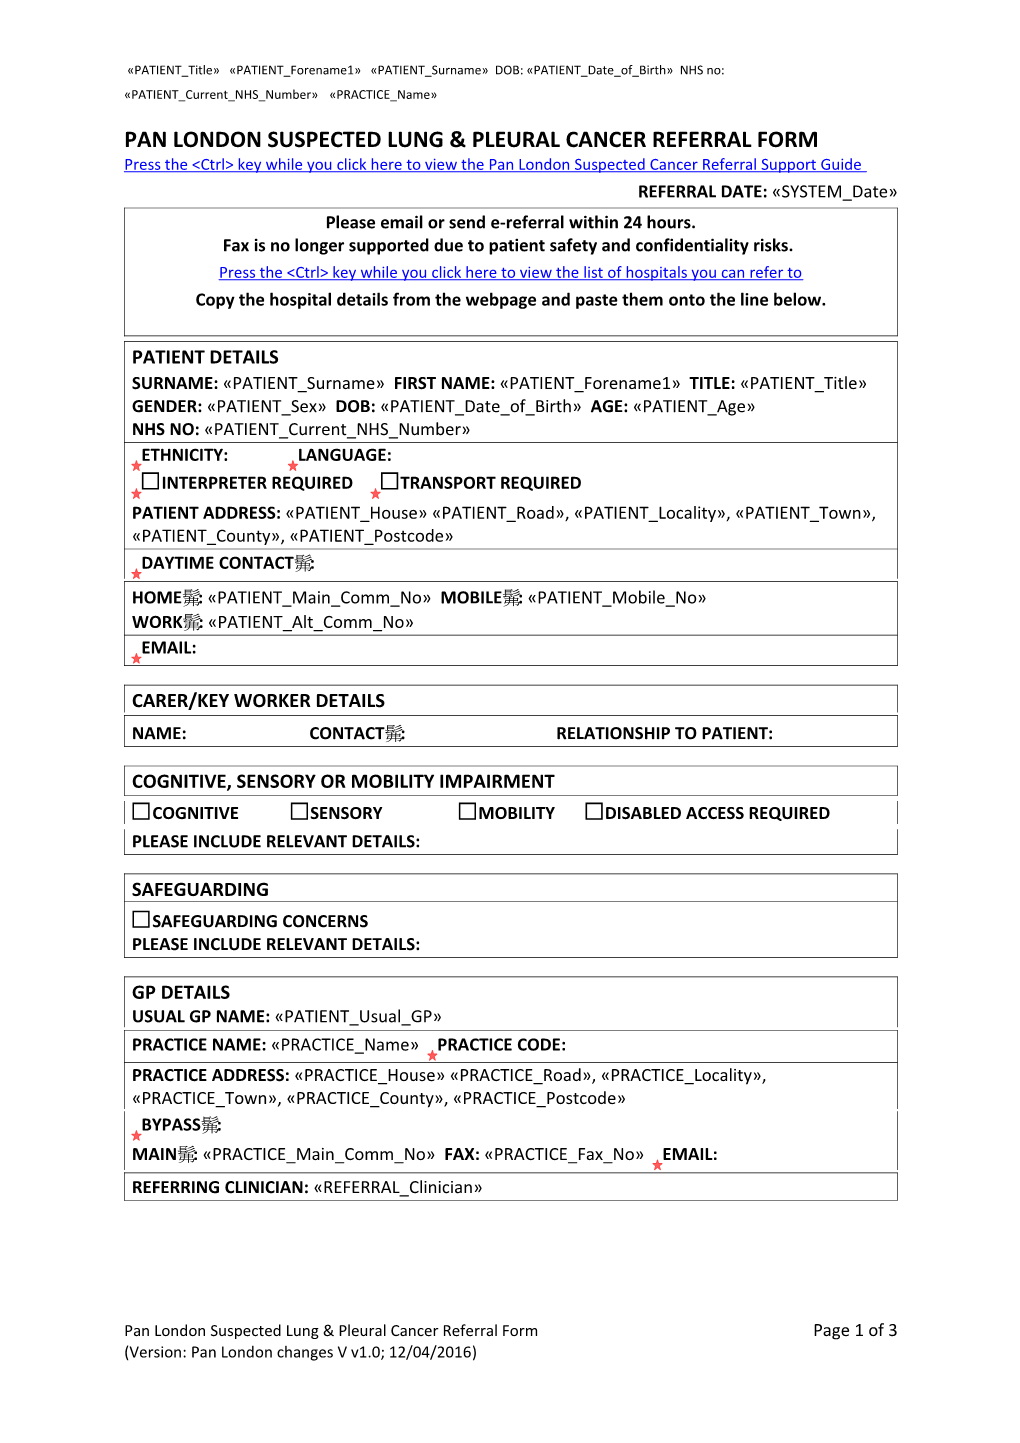 Colorectal 2 Week Referral Form s5